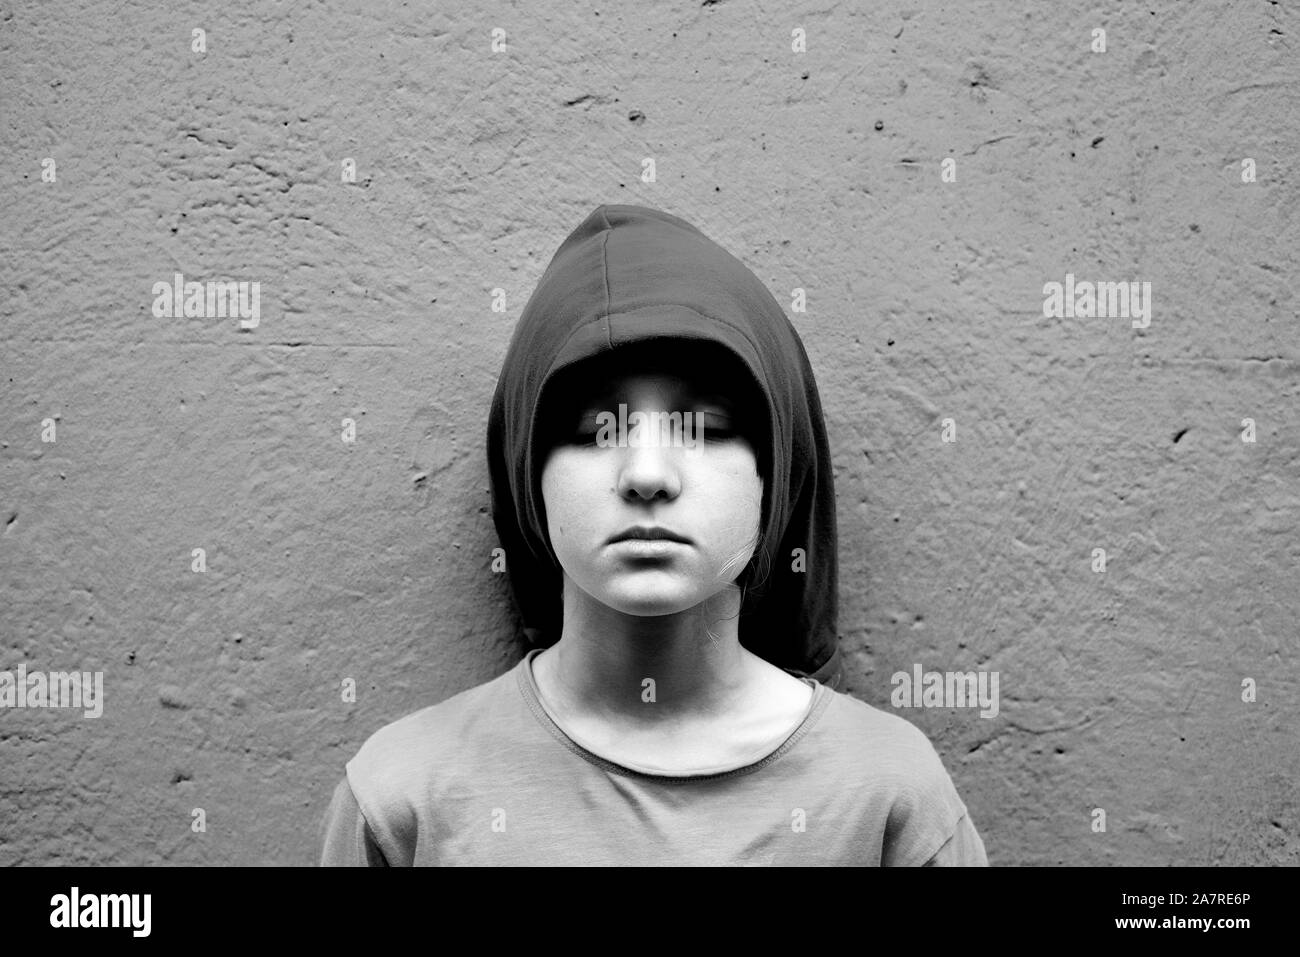 Boy with closed eyes. Stock Photo